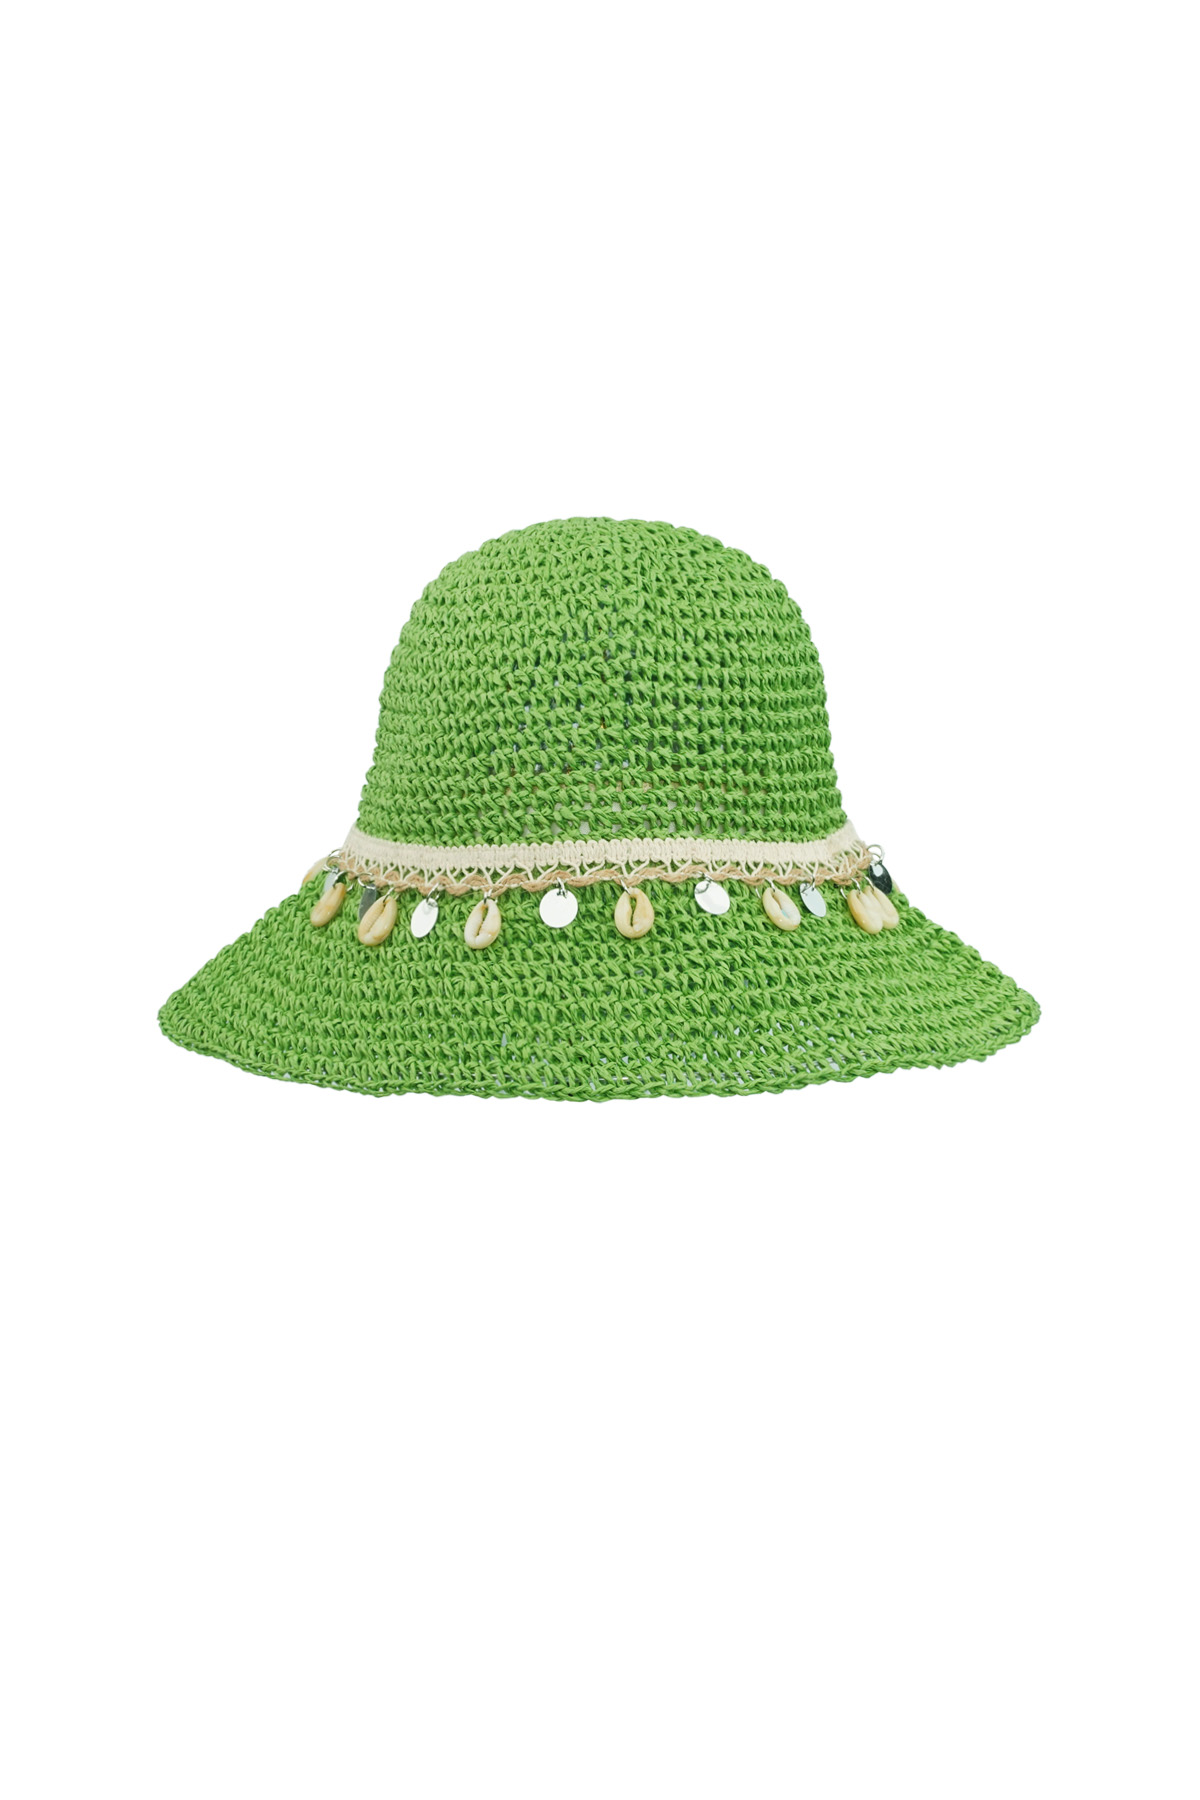 Beach hat with shells - green h5 